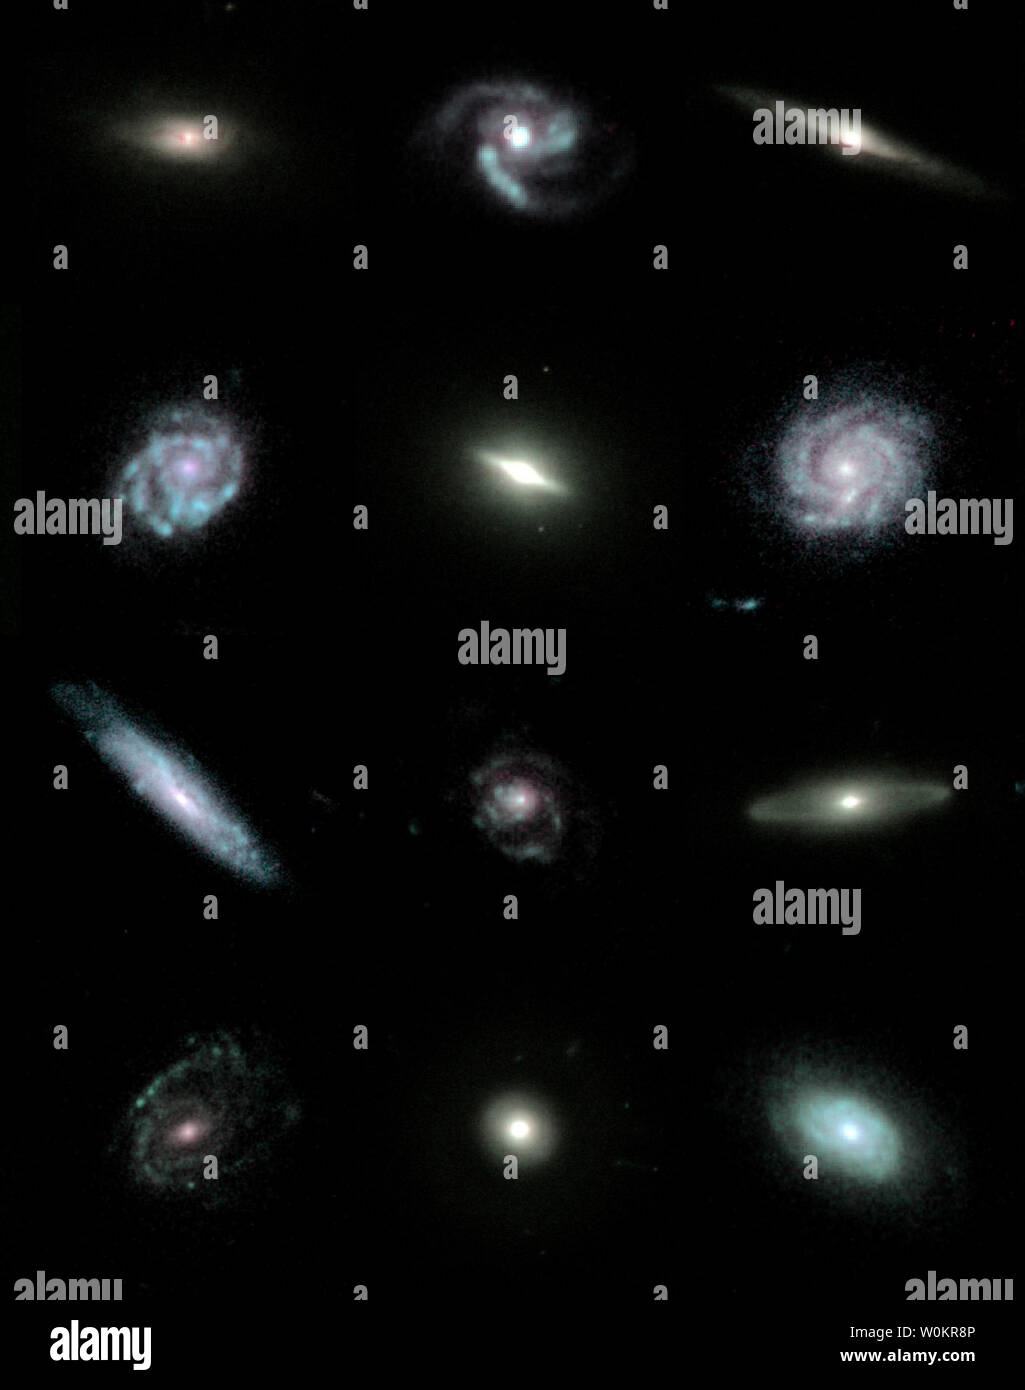 This is a cropped section of a Hubble Space Telescope mosaic of 80 bright galaxies from the GEMS survey, and illustrates the diversity of different galaxy shapes, sizes and types: watermelon-shaped elliptical galaxies, majestic spiral galaxies, some with elongated bars in their centers, and spectacular galaxy mergers.  The mosaic looks nine billion years into the past, when the universe was just one-third its current age. The GEMS survey stands for Galaxy Evolution from Morphology and Spectral energy distribution, and is aimed at better understanding the nature of galaxies.   (UPI Photo/Hubble Stock Photo